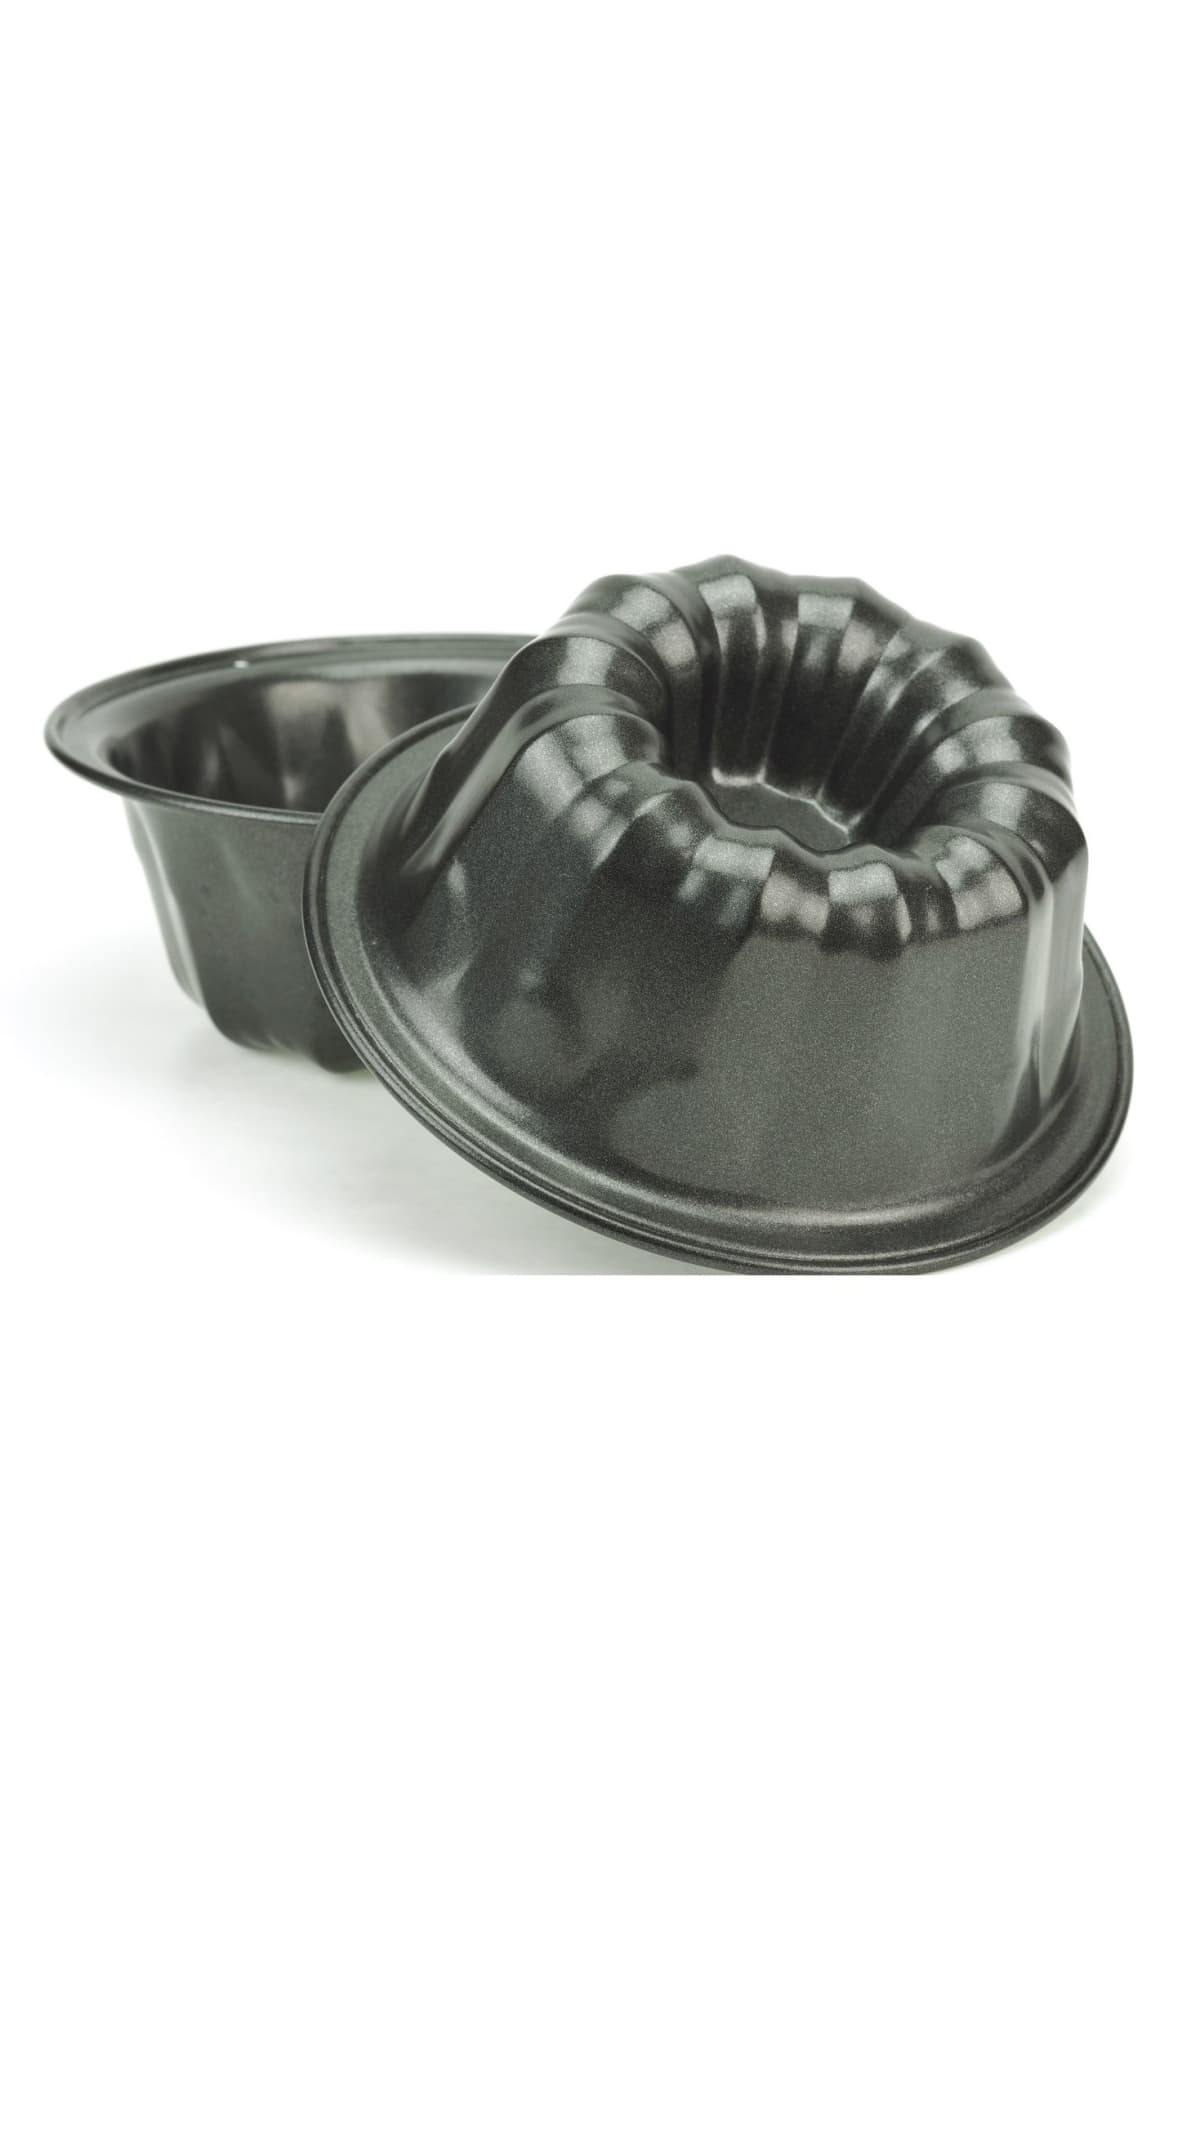 Two black Bundt cake pans against a white background